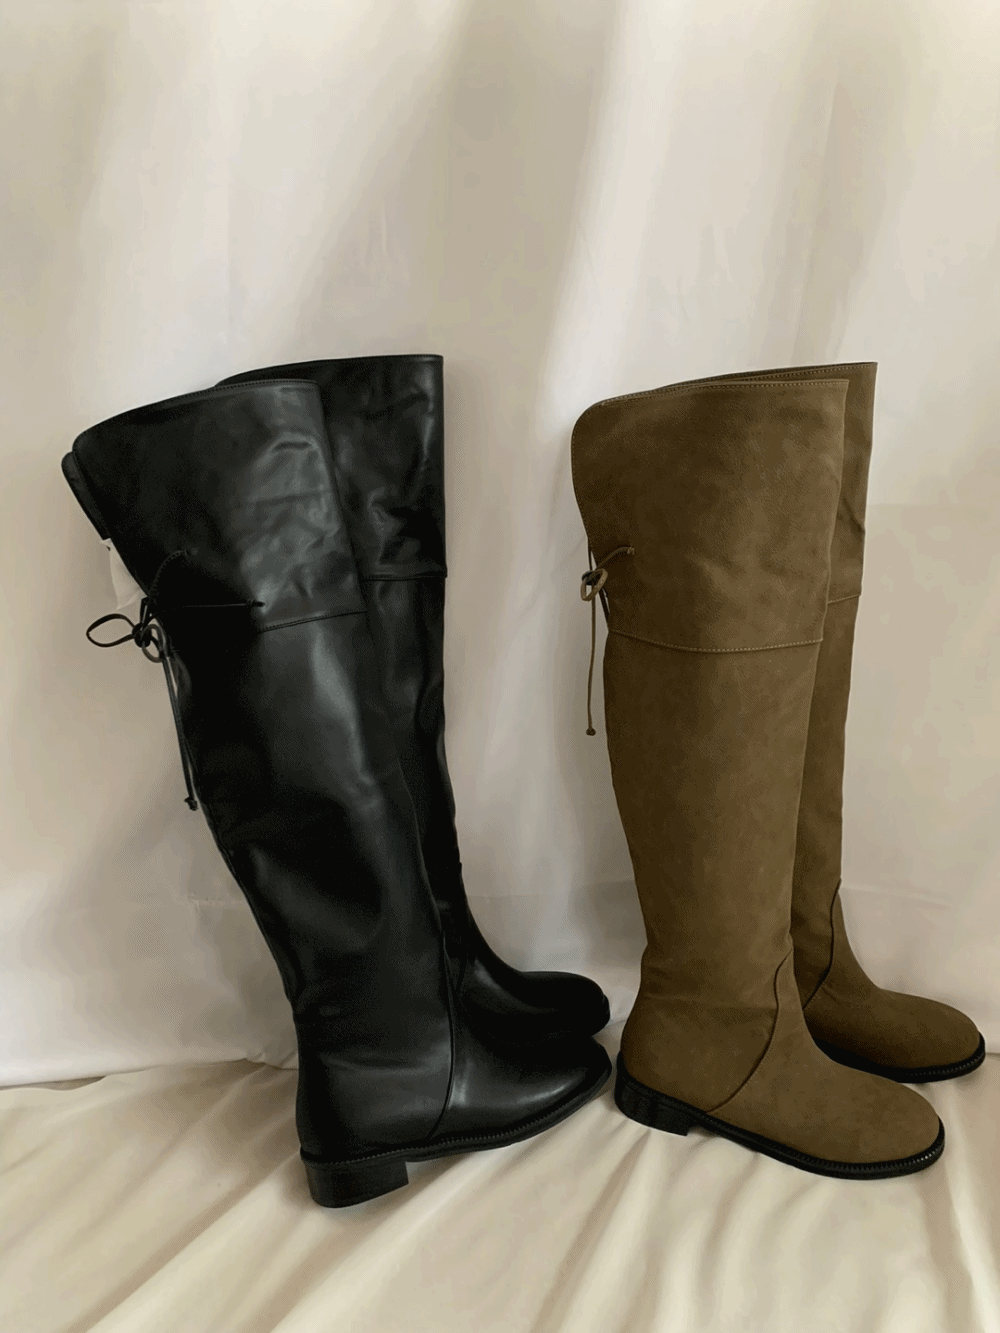 [Shoes] Vintage Two-way High Ribbon Boots / 2 colors